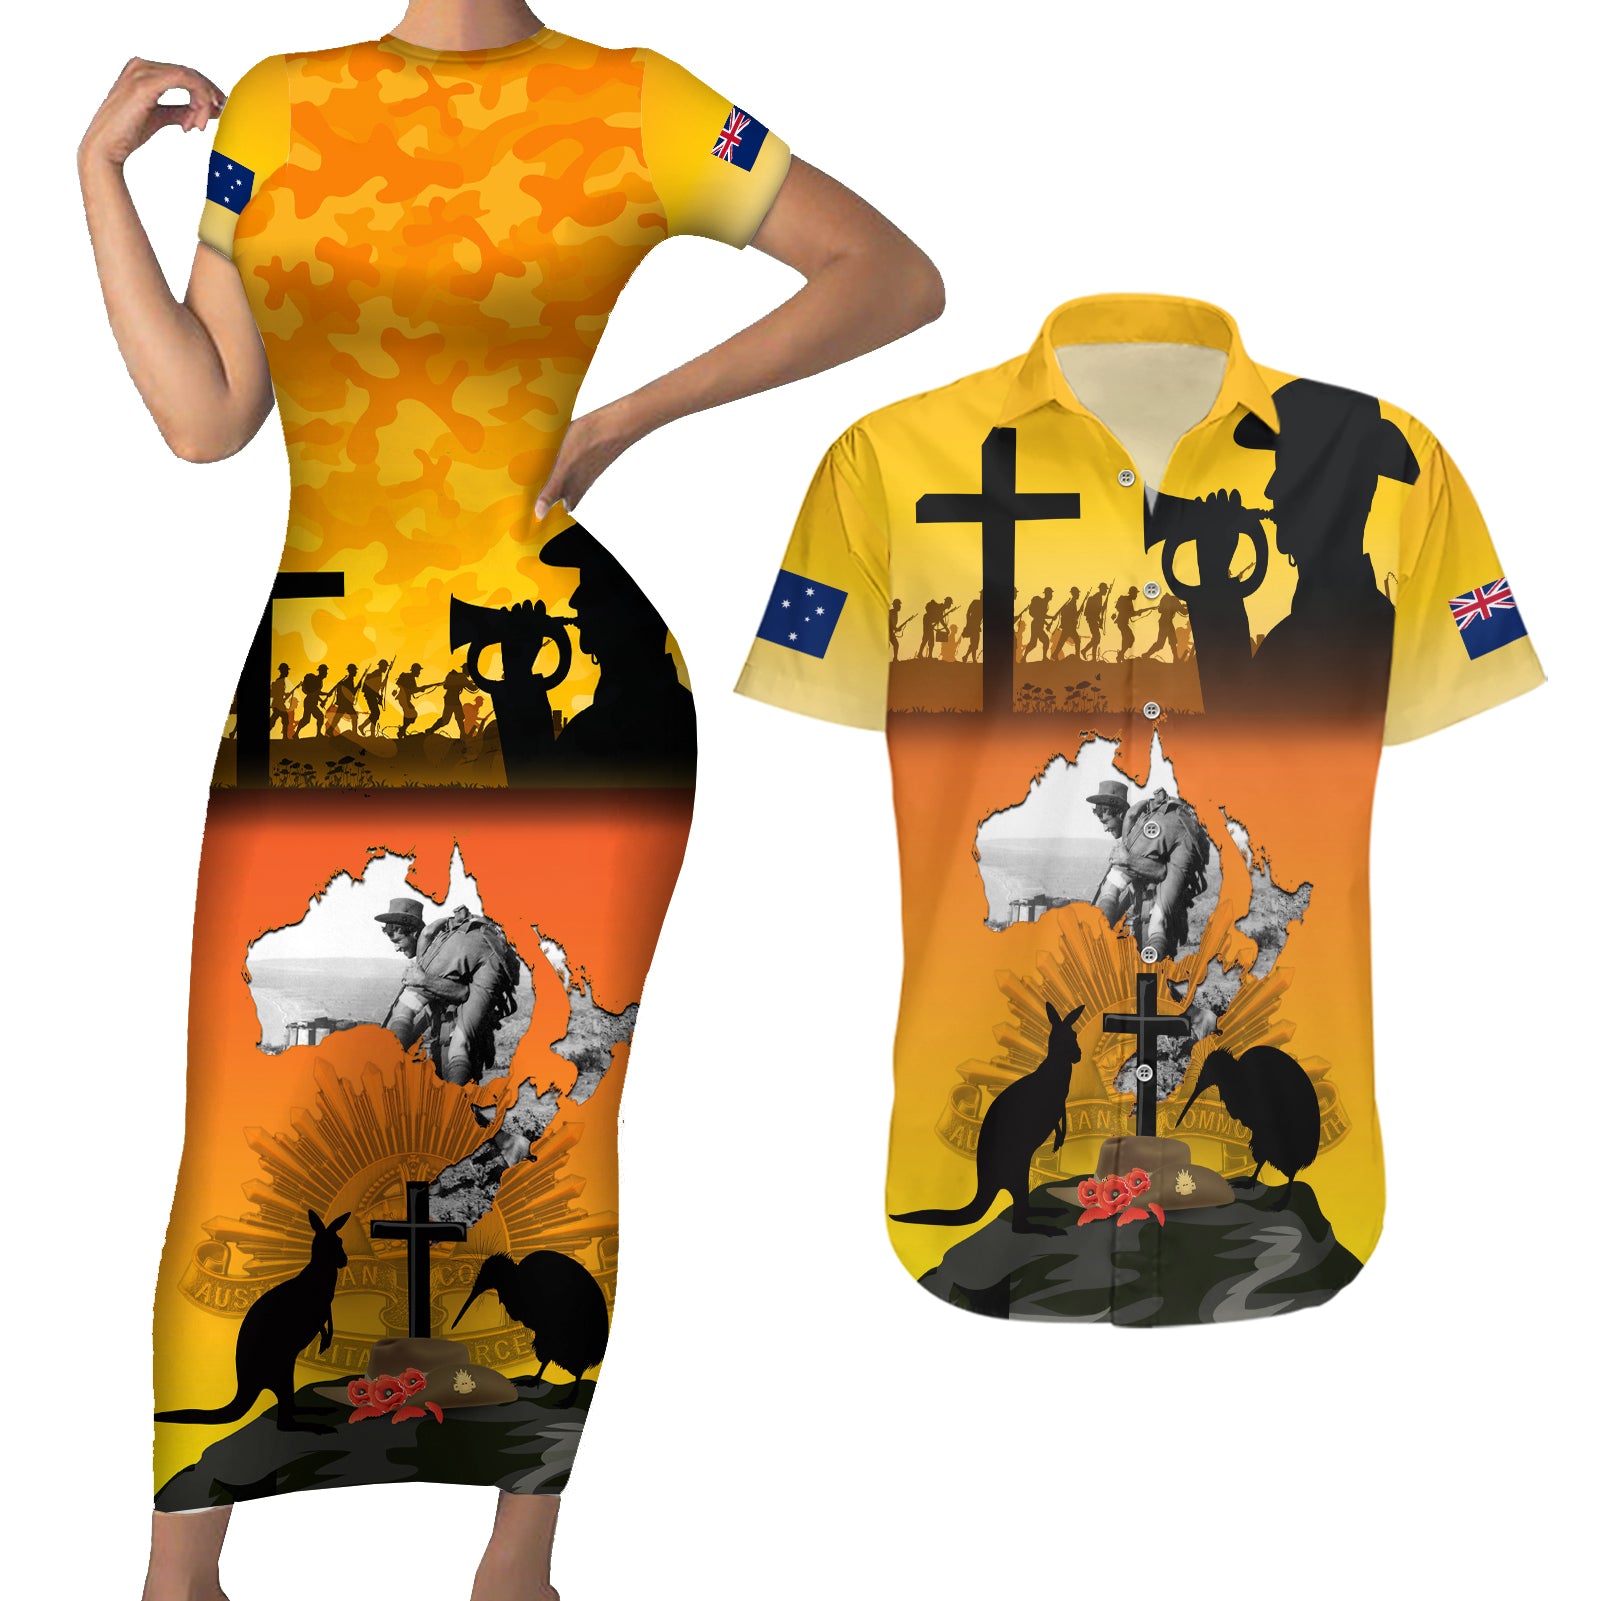 New Zealand and Australia ANZAC Day Couples Matching Short Sleeve Bodycon Dress and Hawaiian Shirt Gallipoli Lest We Forget LT03 Yellow - Polynesian Pride